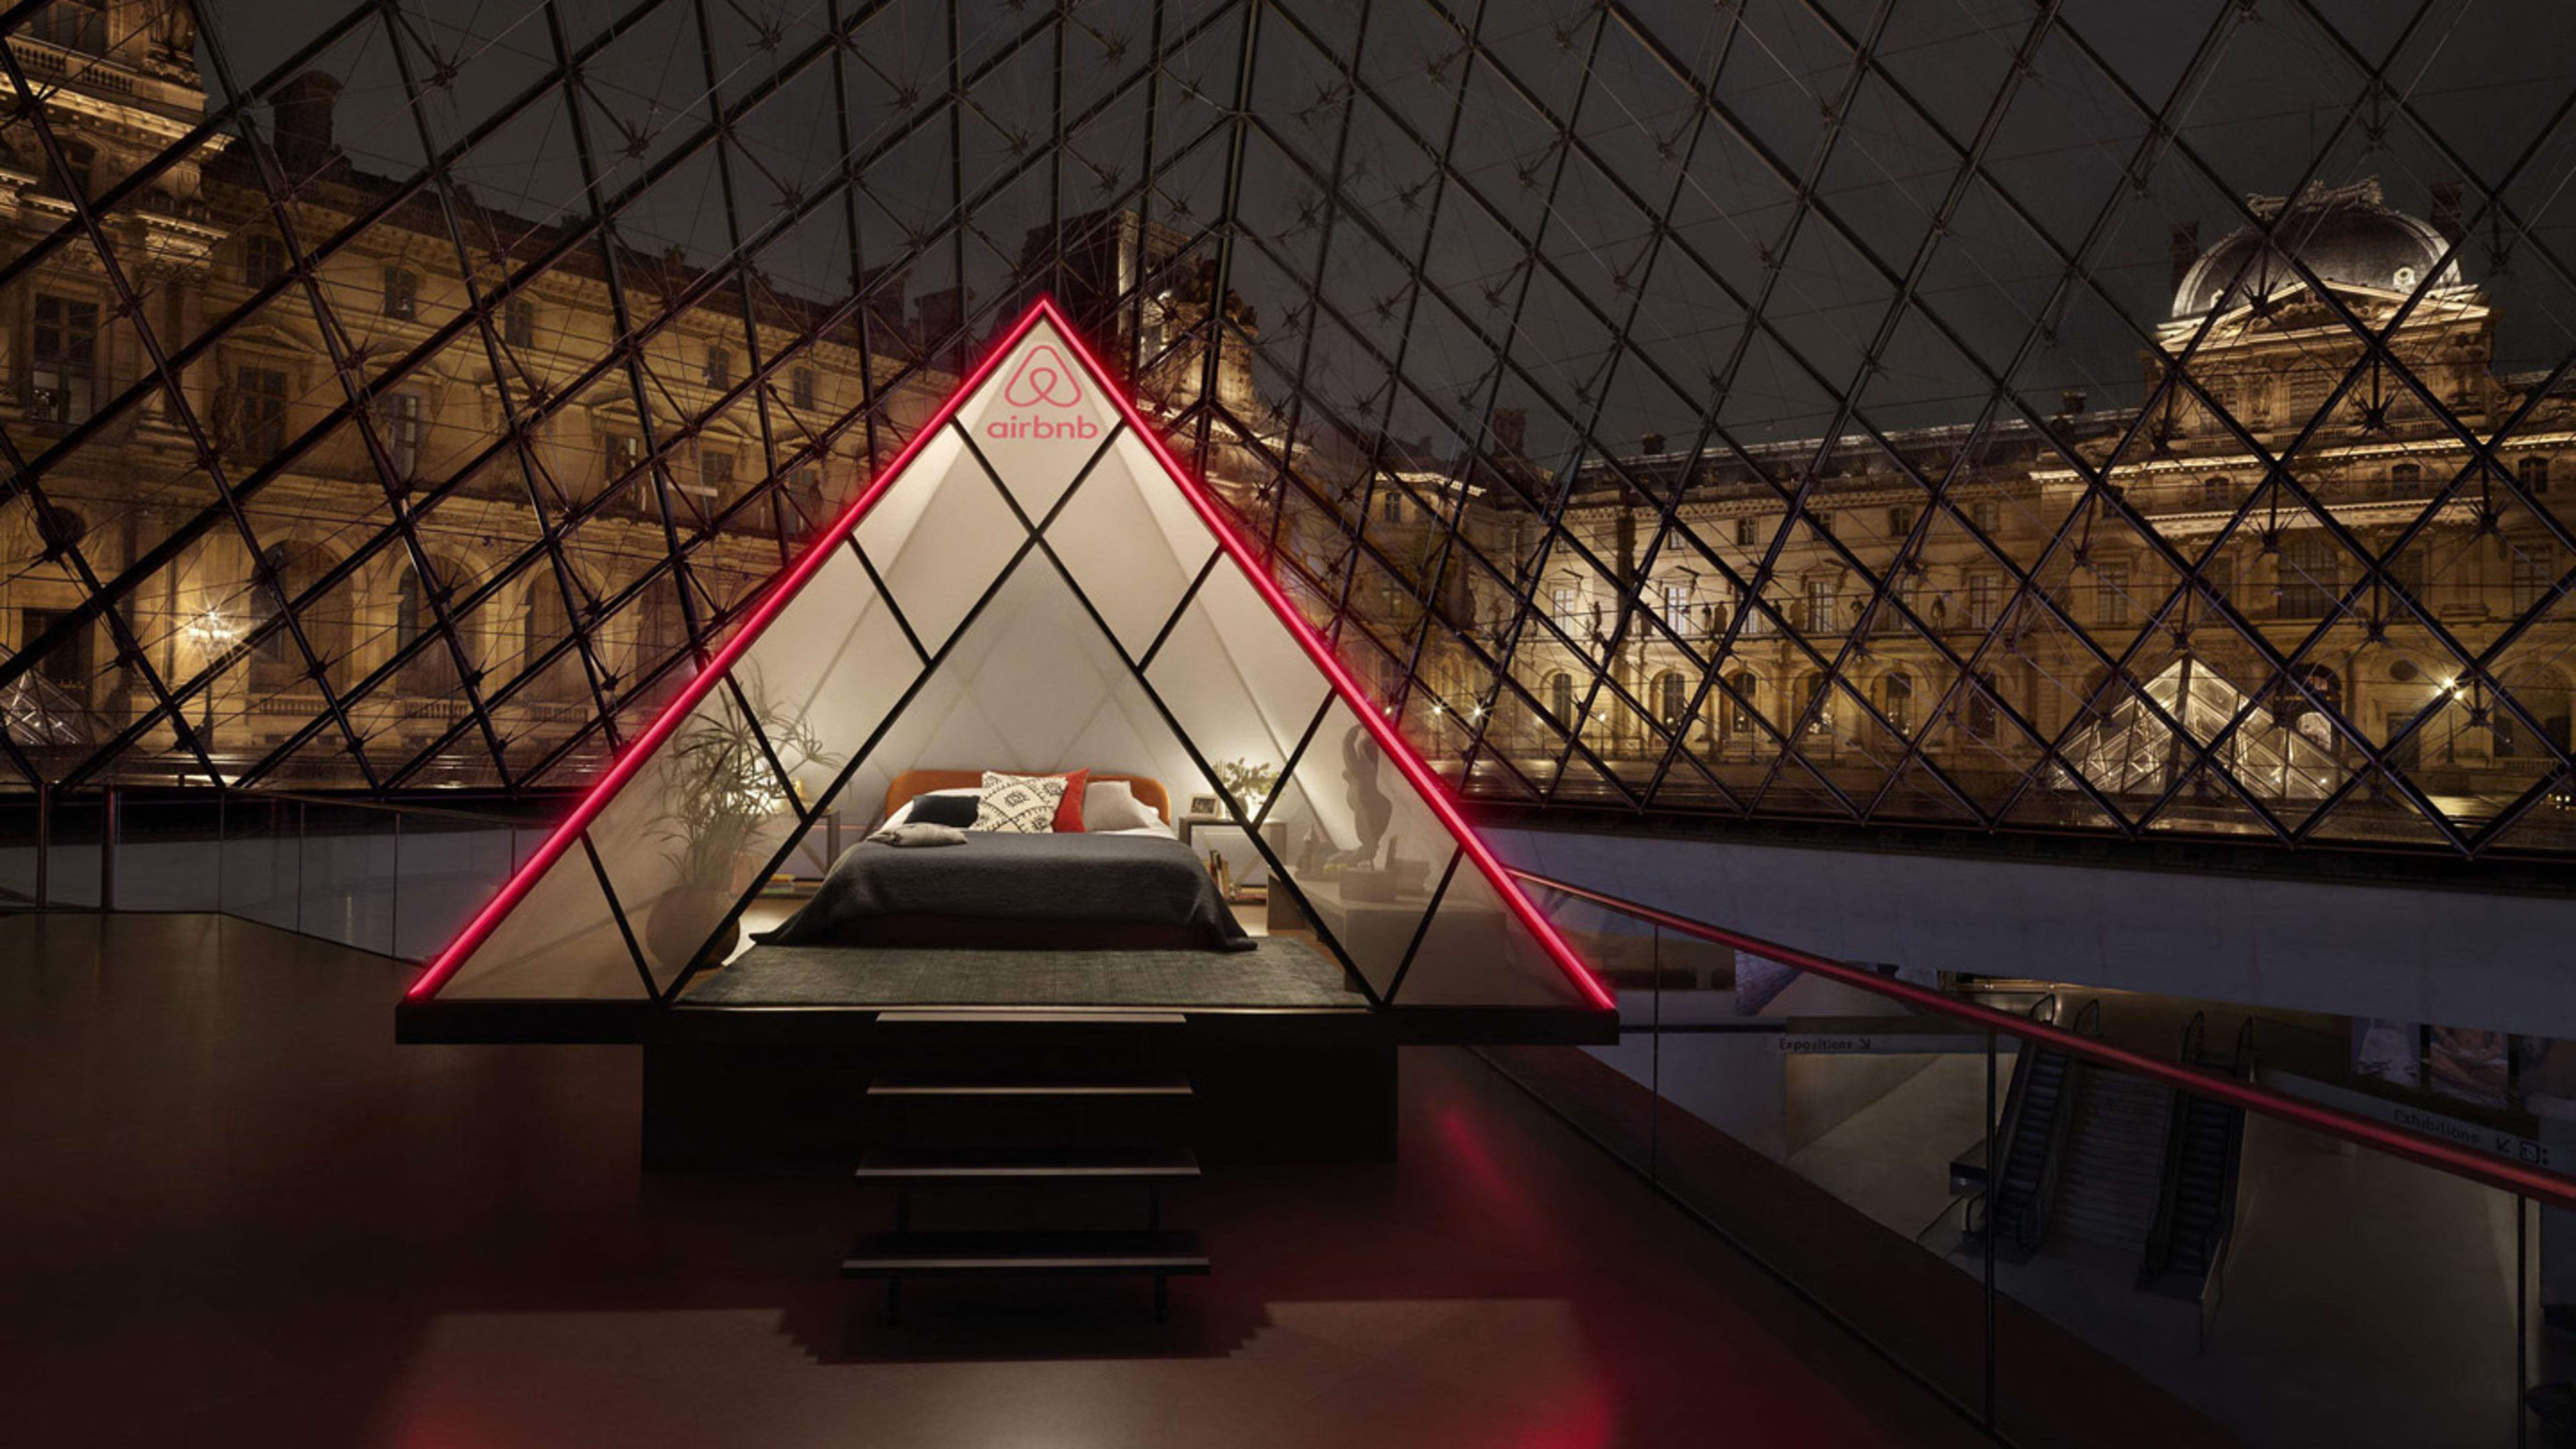 Airbnb is picking one couple to sleep over in the world’s most famous museum